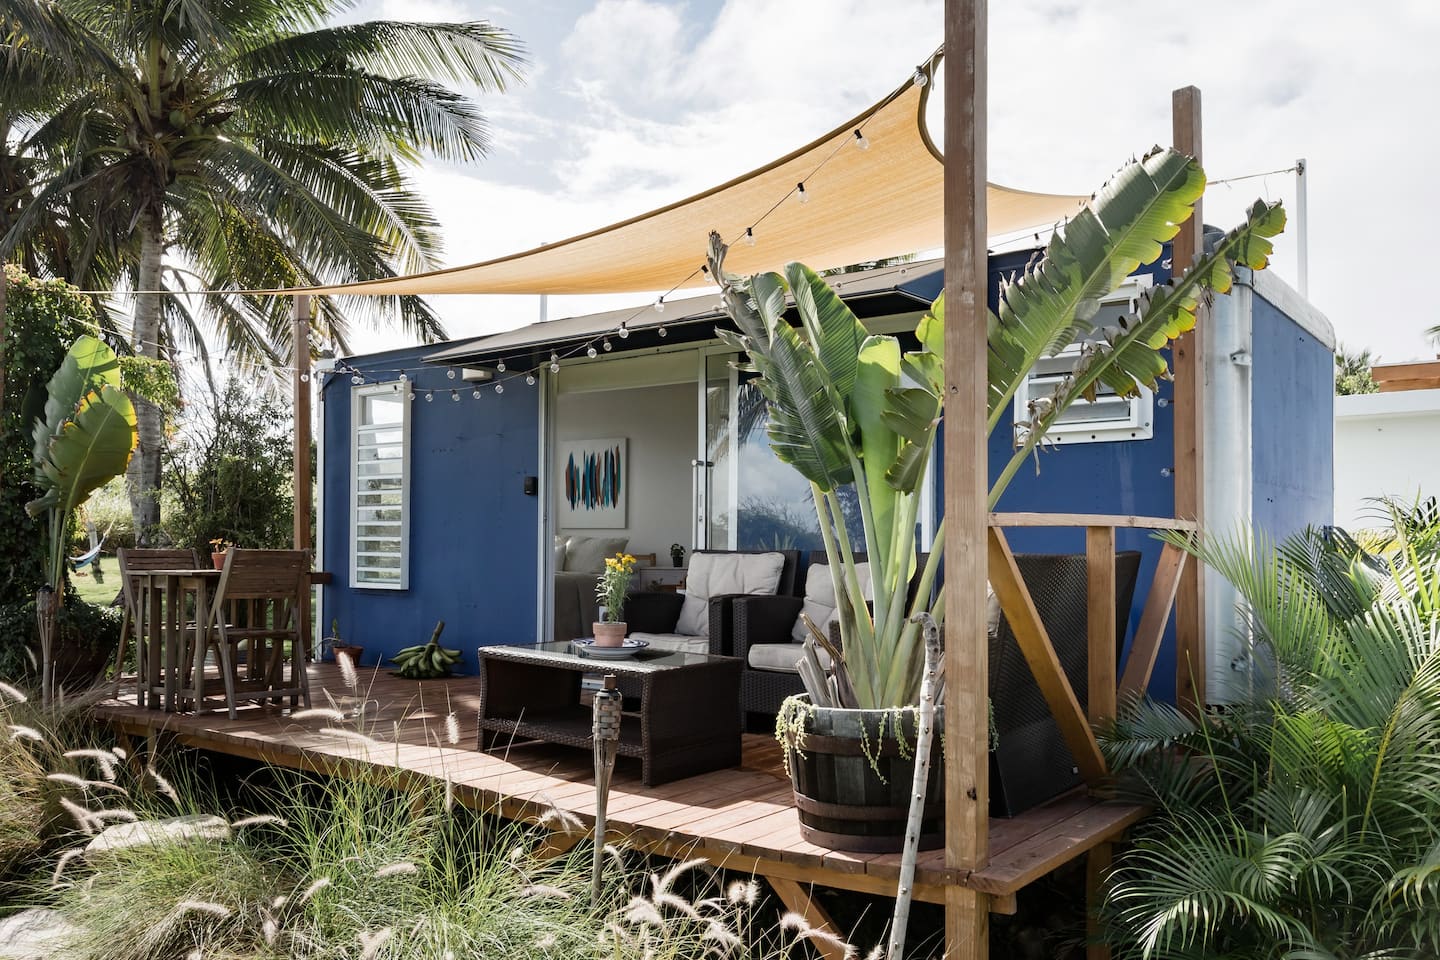 Tropical glamping close to the ocean, one of the best Airbnbs in Puerto Rico